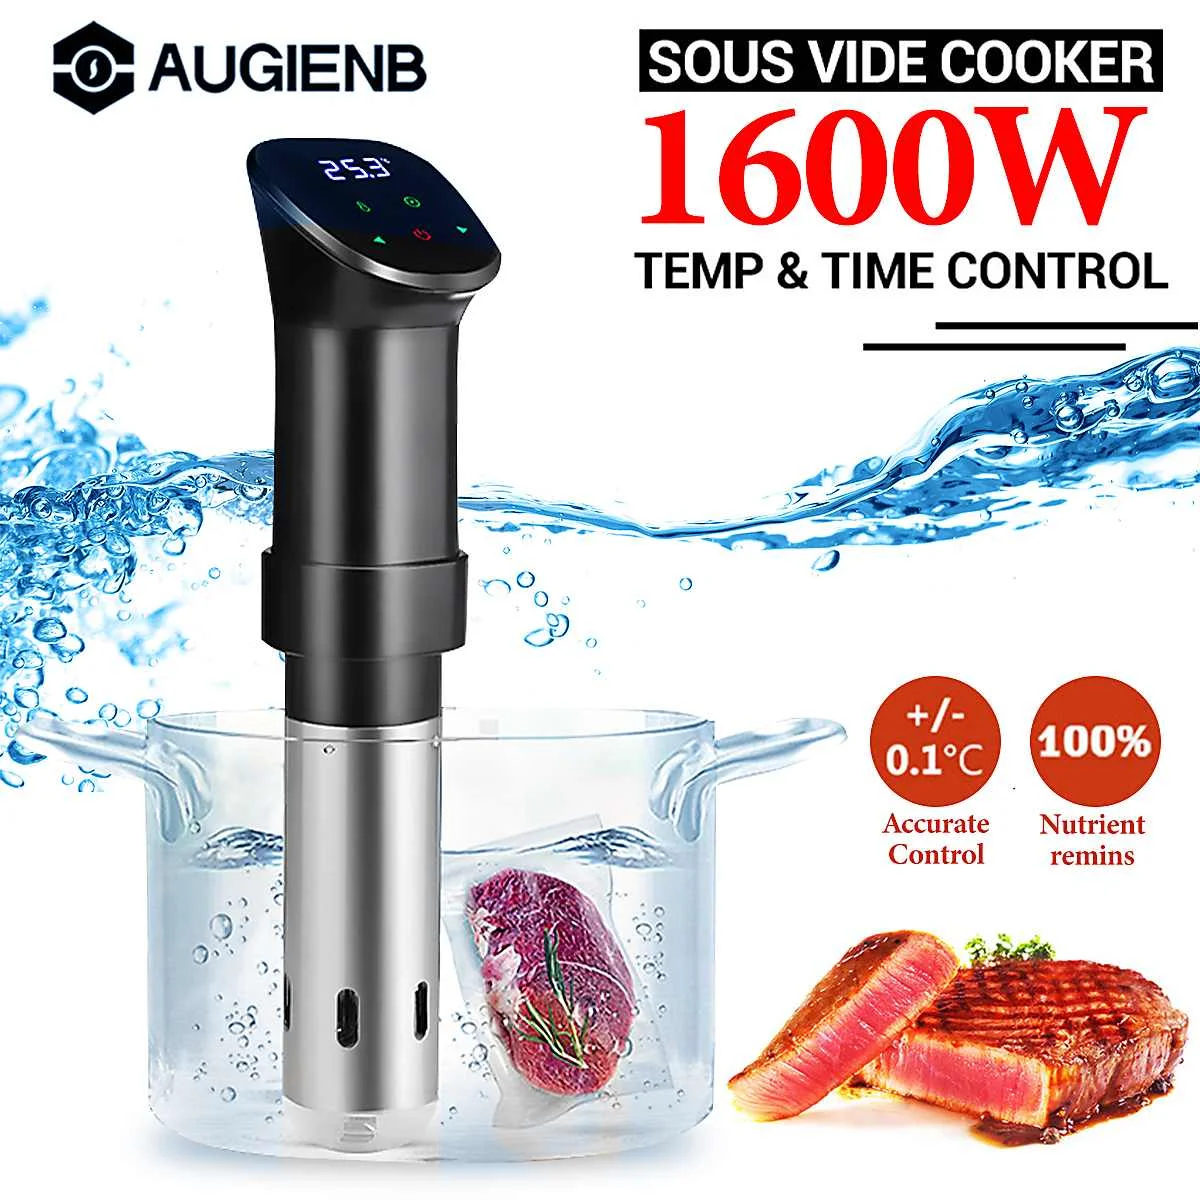 AUGIENB unisex 1600W discount Slow Cooker Vacuum Vide Sous Thermal Immers